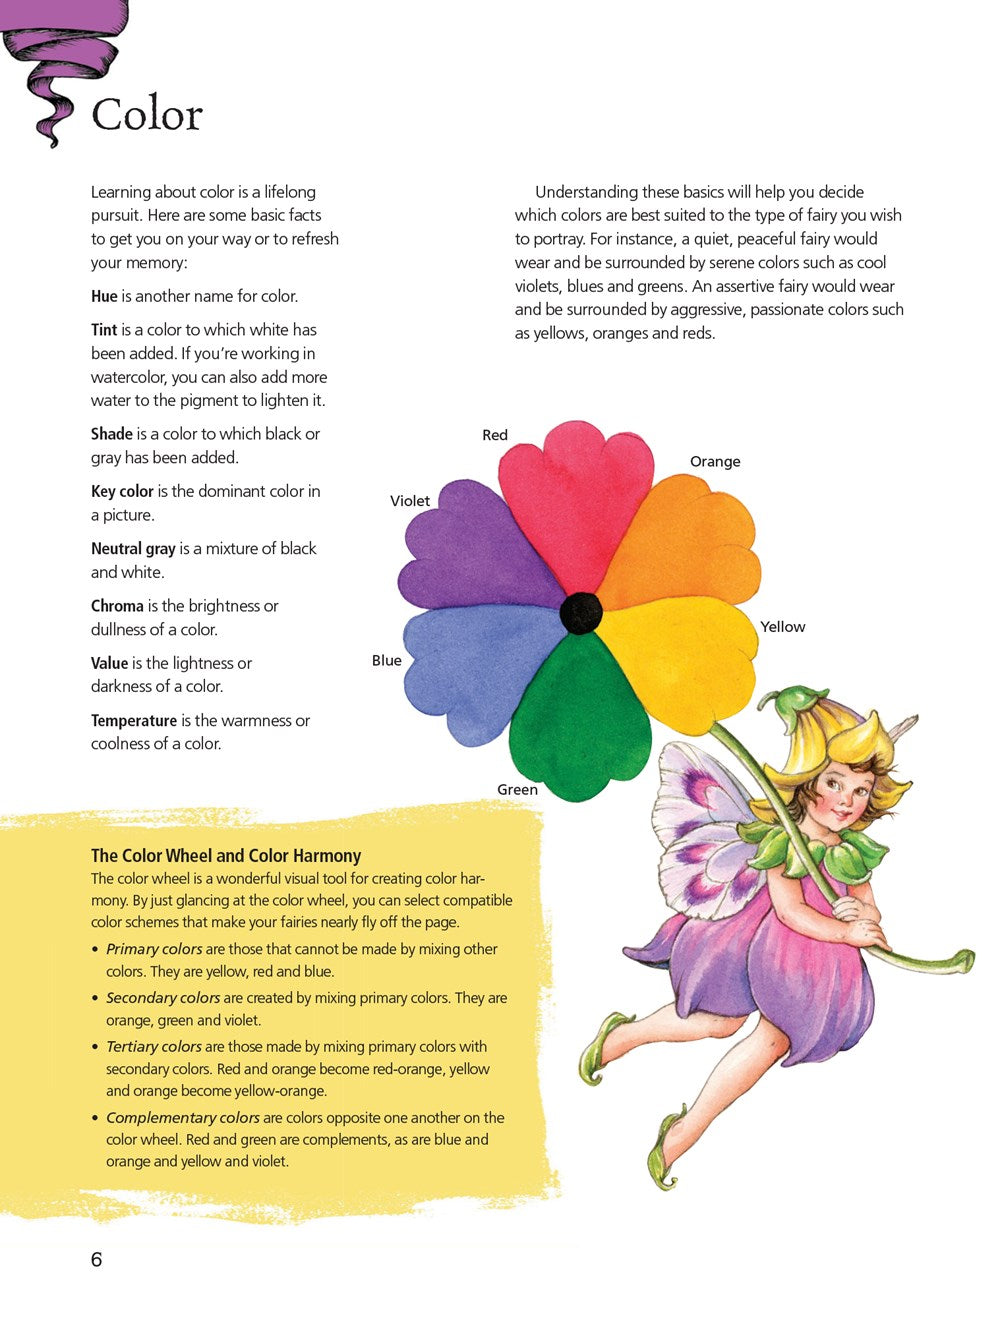 Fairy World Coloring Pages